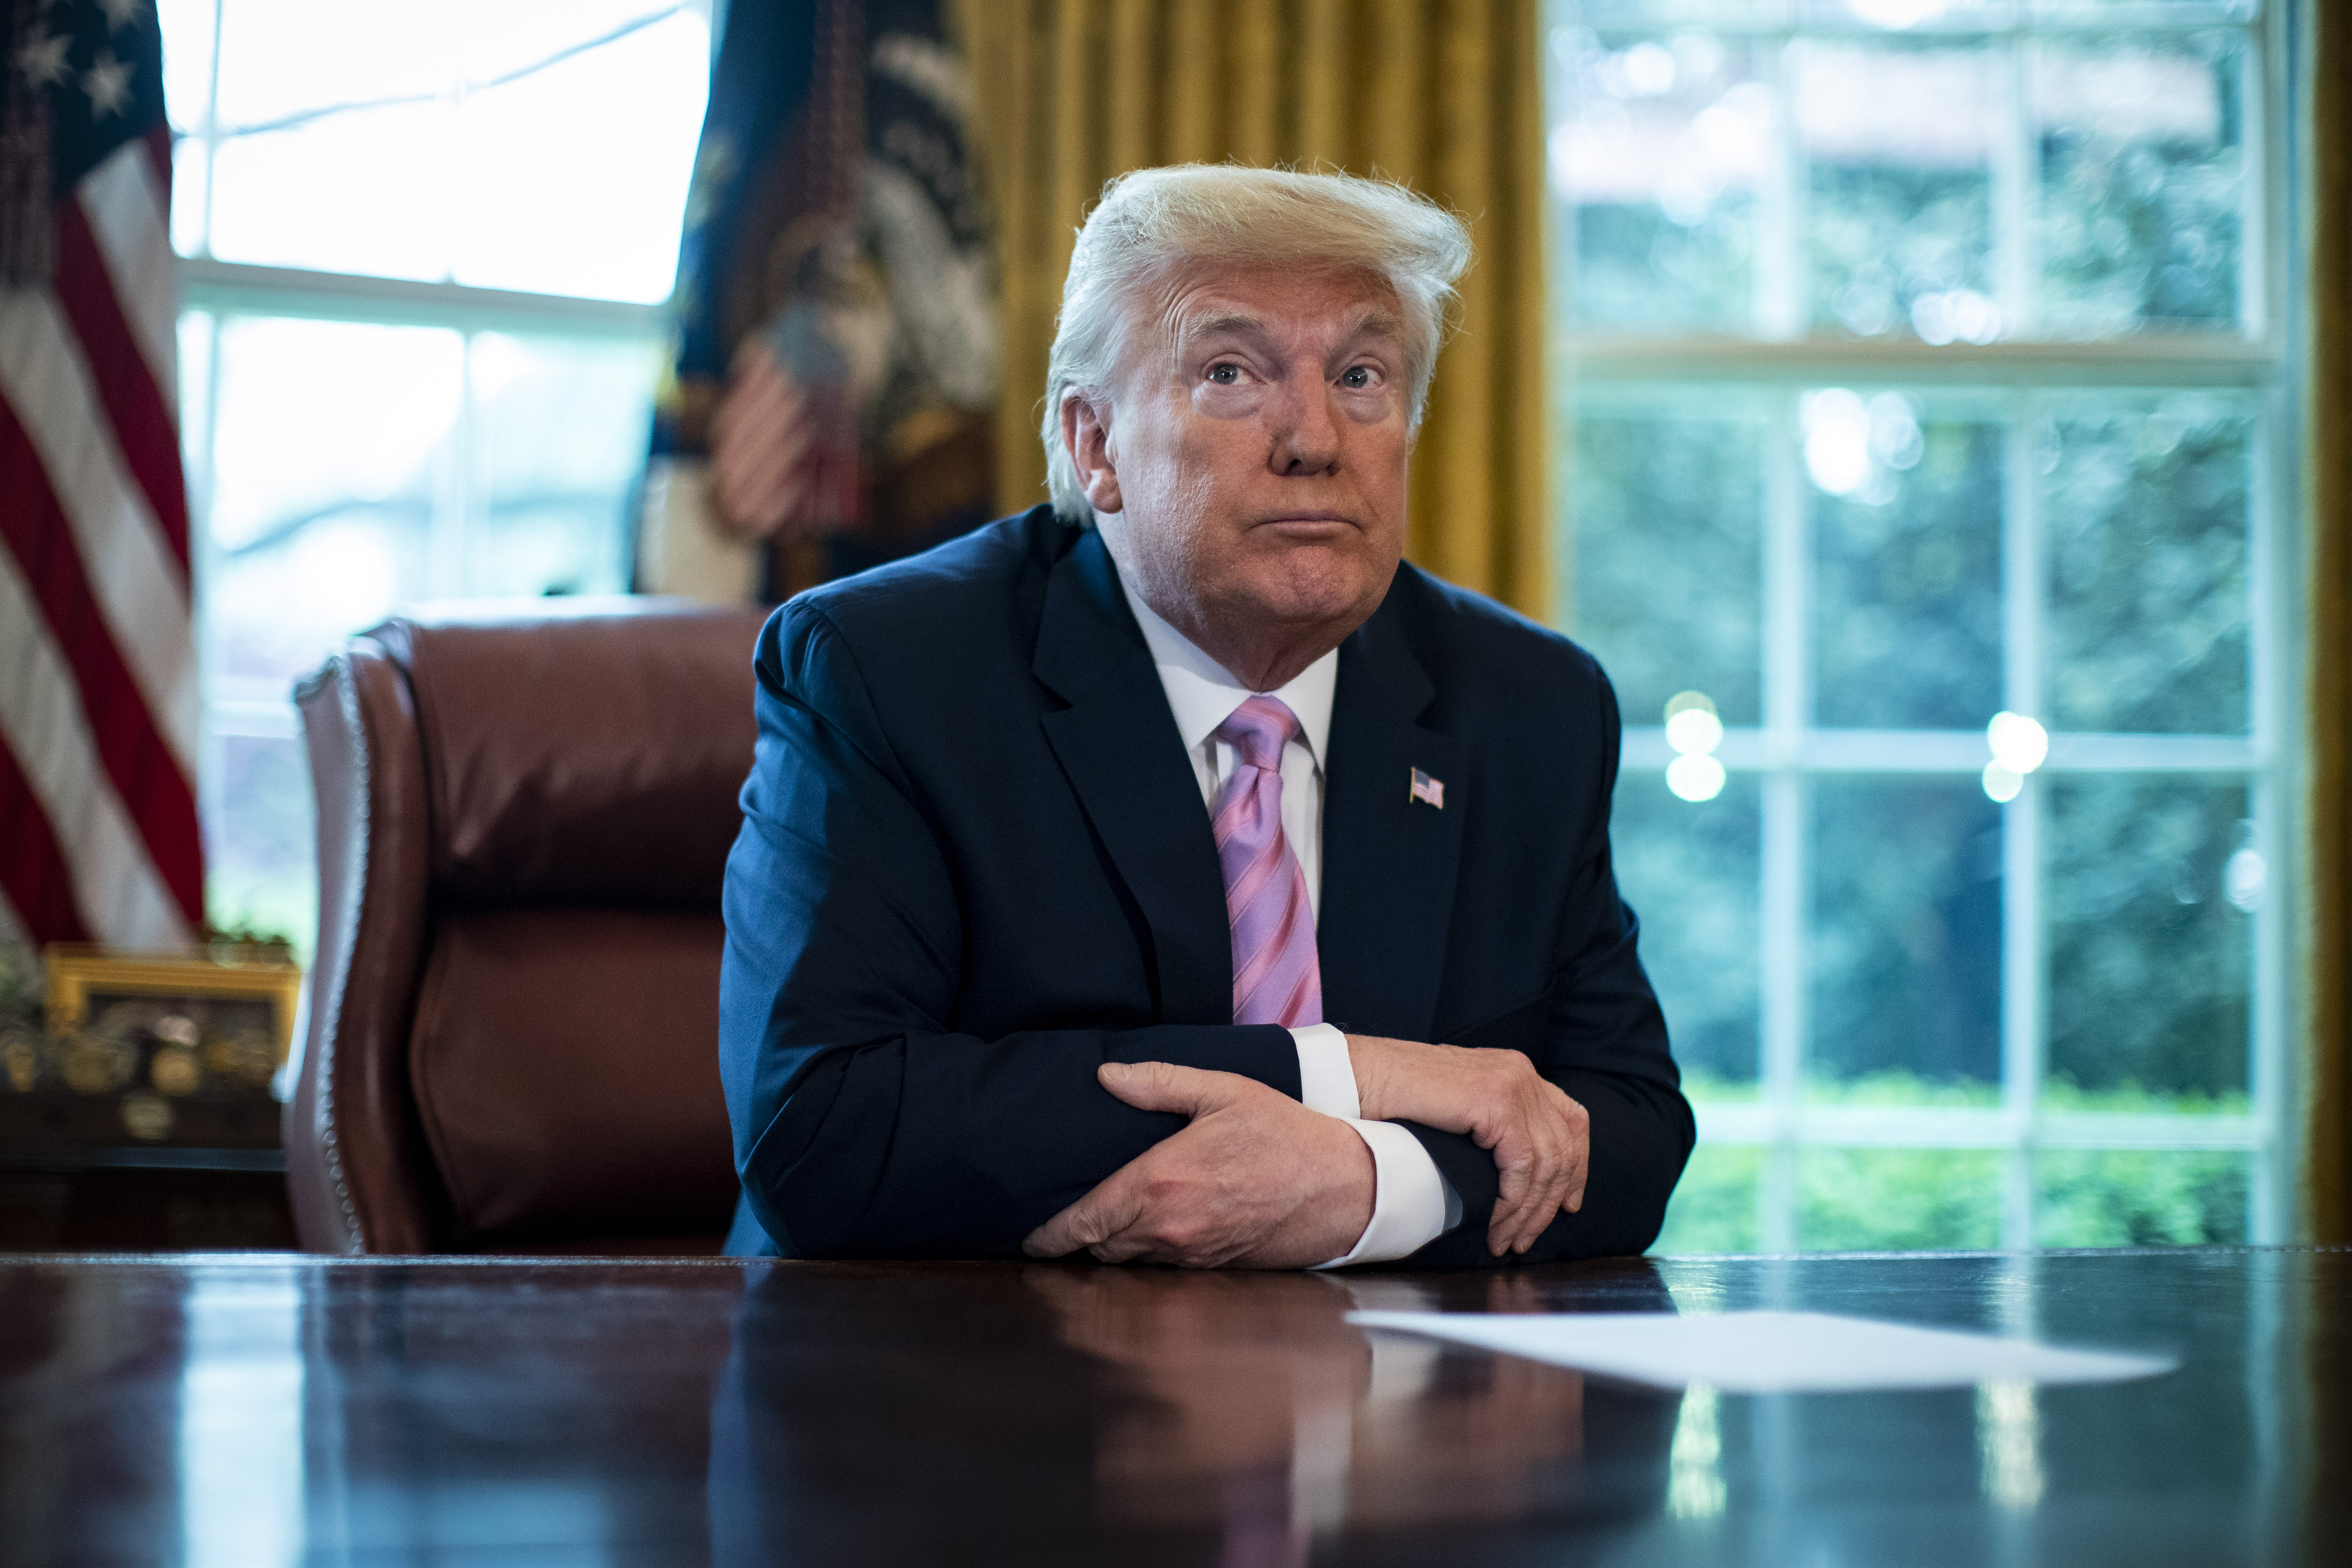 WASHINGTON, DC - APRIL 10: President Donald Trump pauses following speaking during a Easter blessing in the Oval Office of the White House on April 10, 2020 in Washington, DC.The Trump adminstration is stressing the need for physical distancing over the Easter weekend. (Photo by Al Drago - Pool/Getty Images)